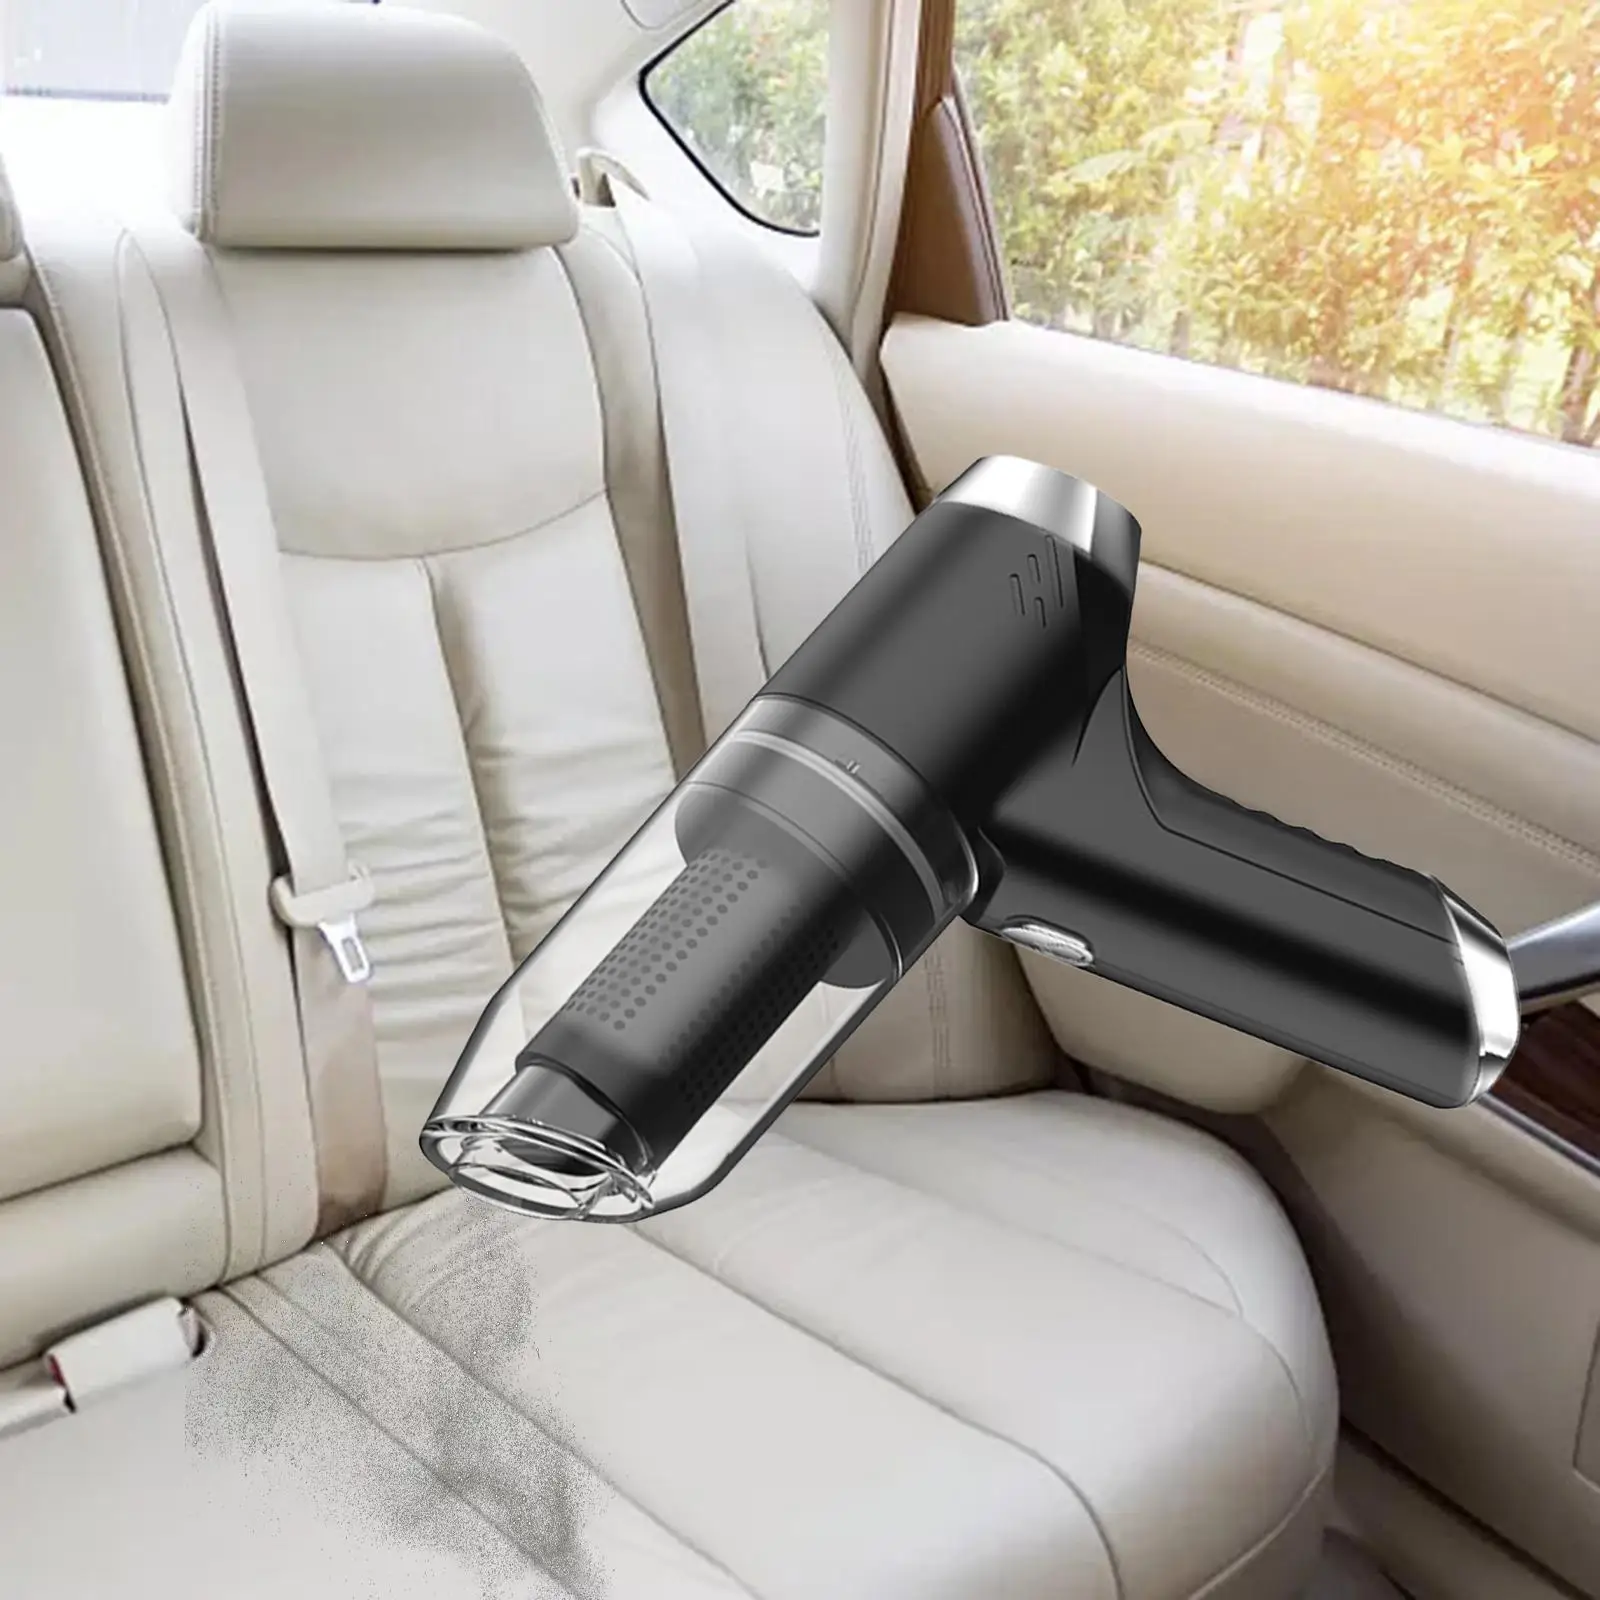 Car Vacuum Cleaner with Nozzles Strong Suction Automotive Accessories Vacuum Cleaner for car Pet Hair Keyboard Cleaning